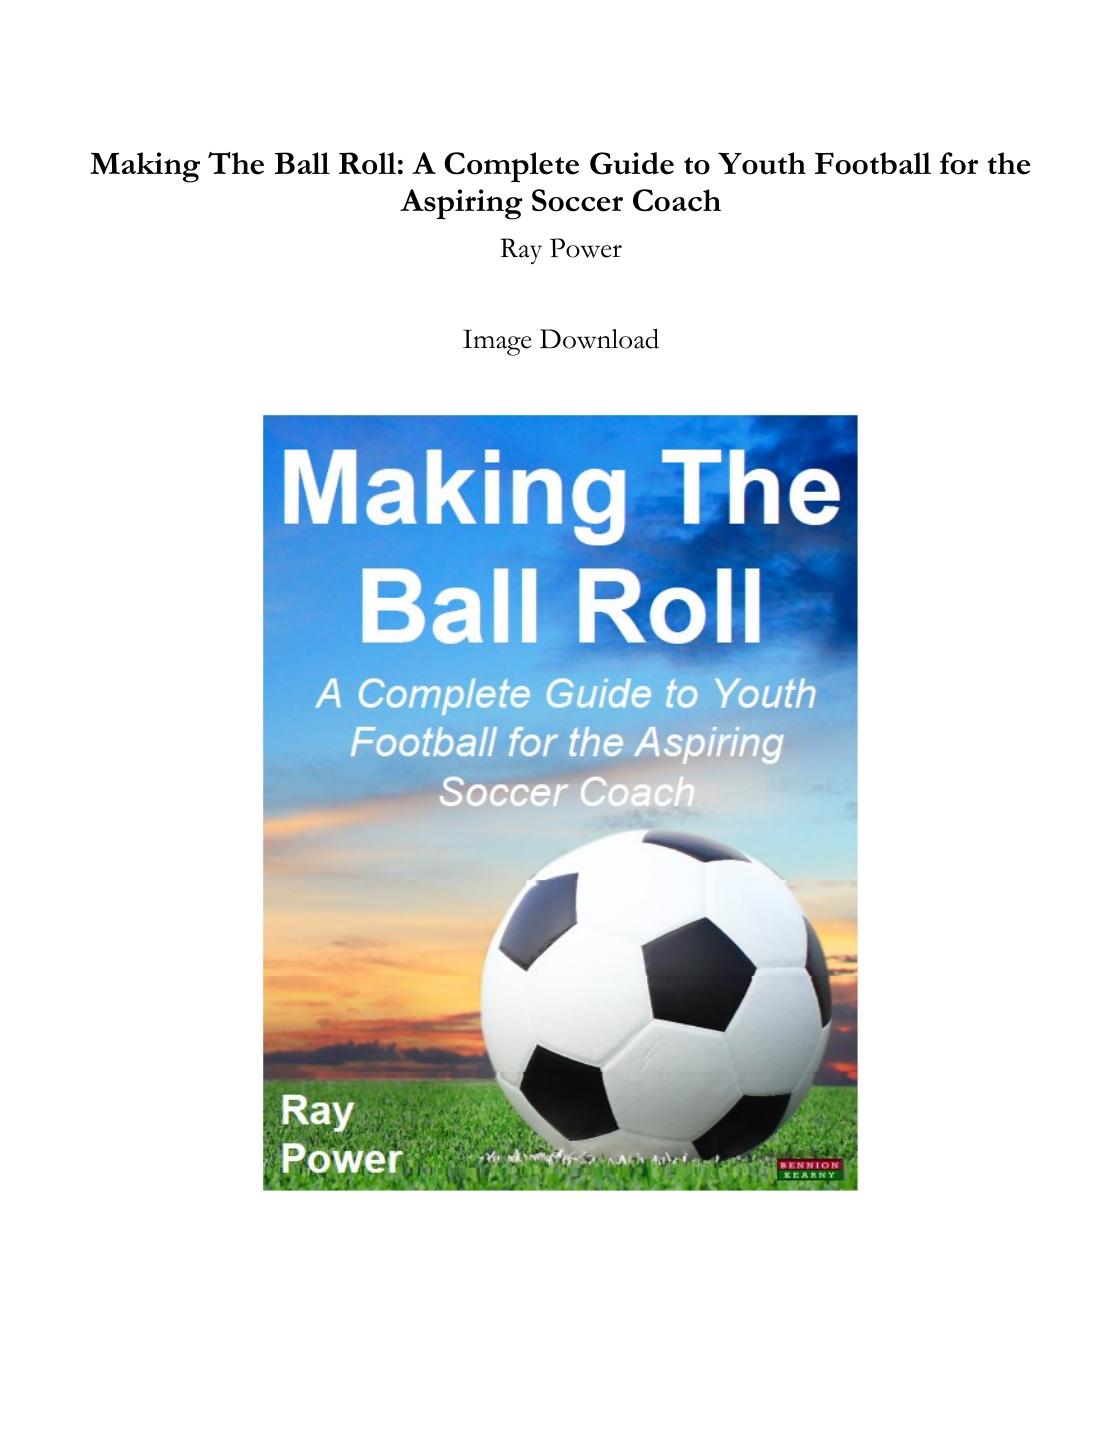 A Complete Guide to Youth Football for the Aspiring Soccer Coach 2014